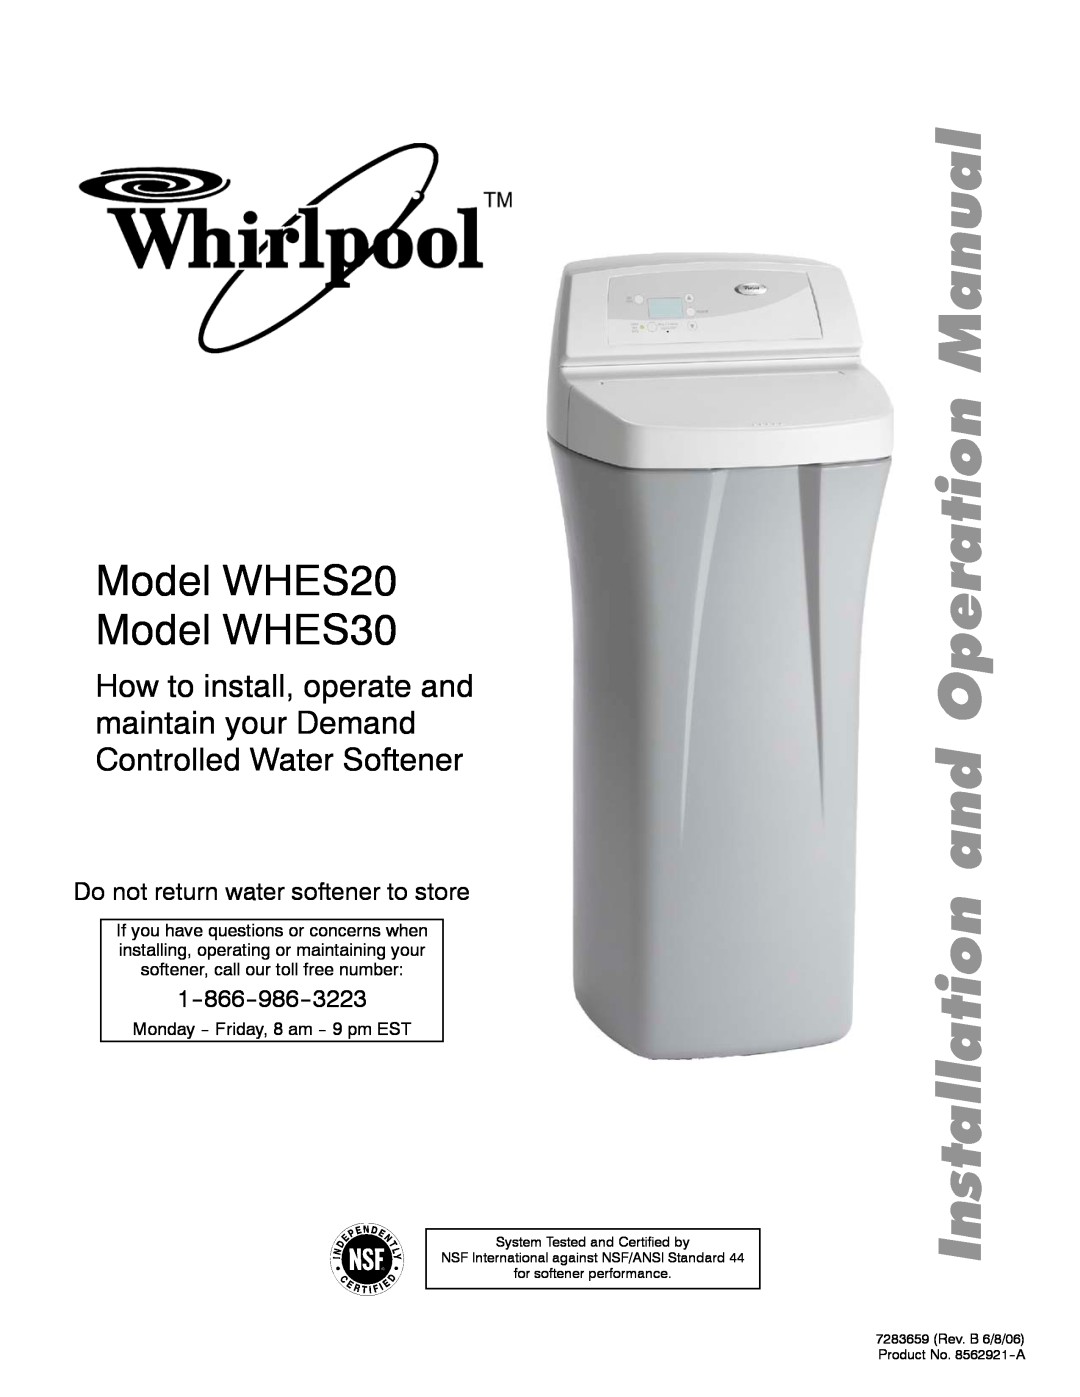 Whirlpool manual Do not return water softener to store, 1--866--986--3223, Model WHES20 Model WHES30 